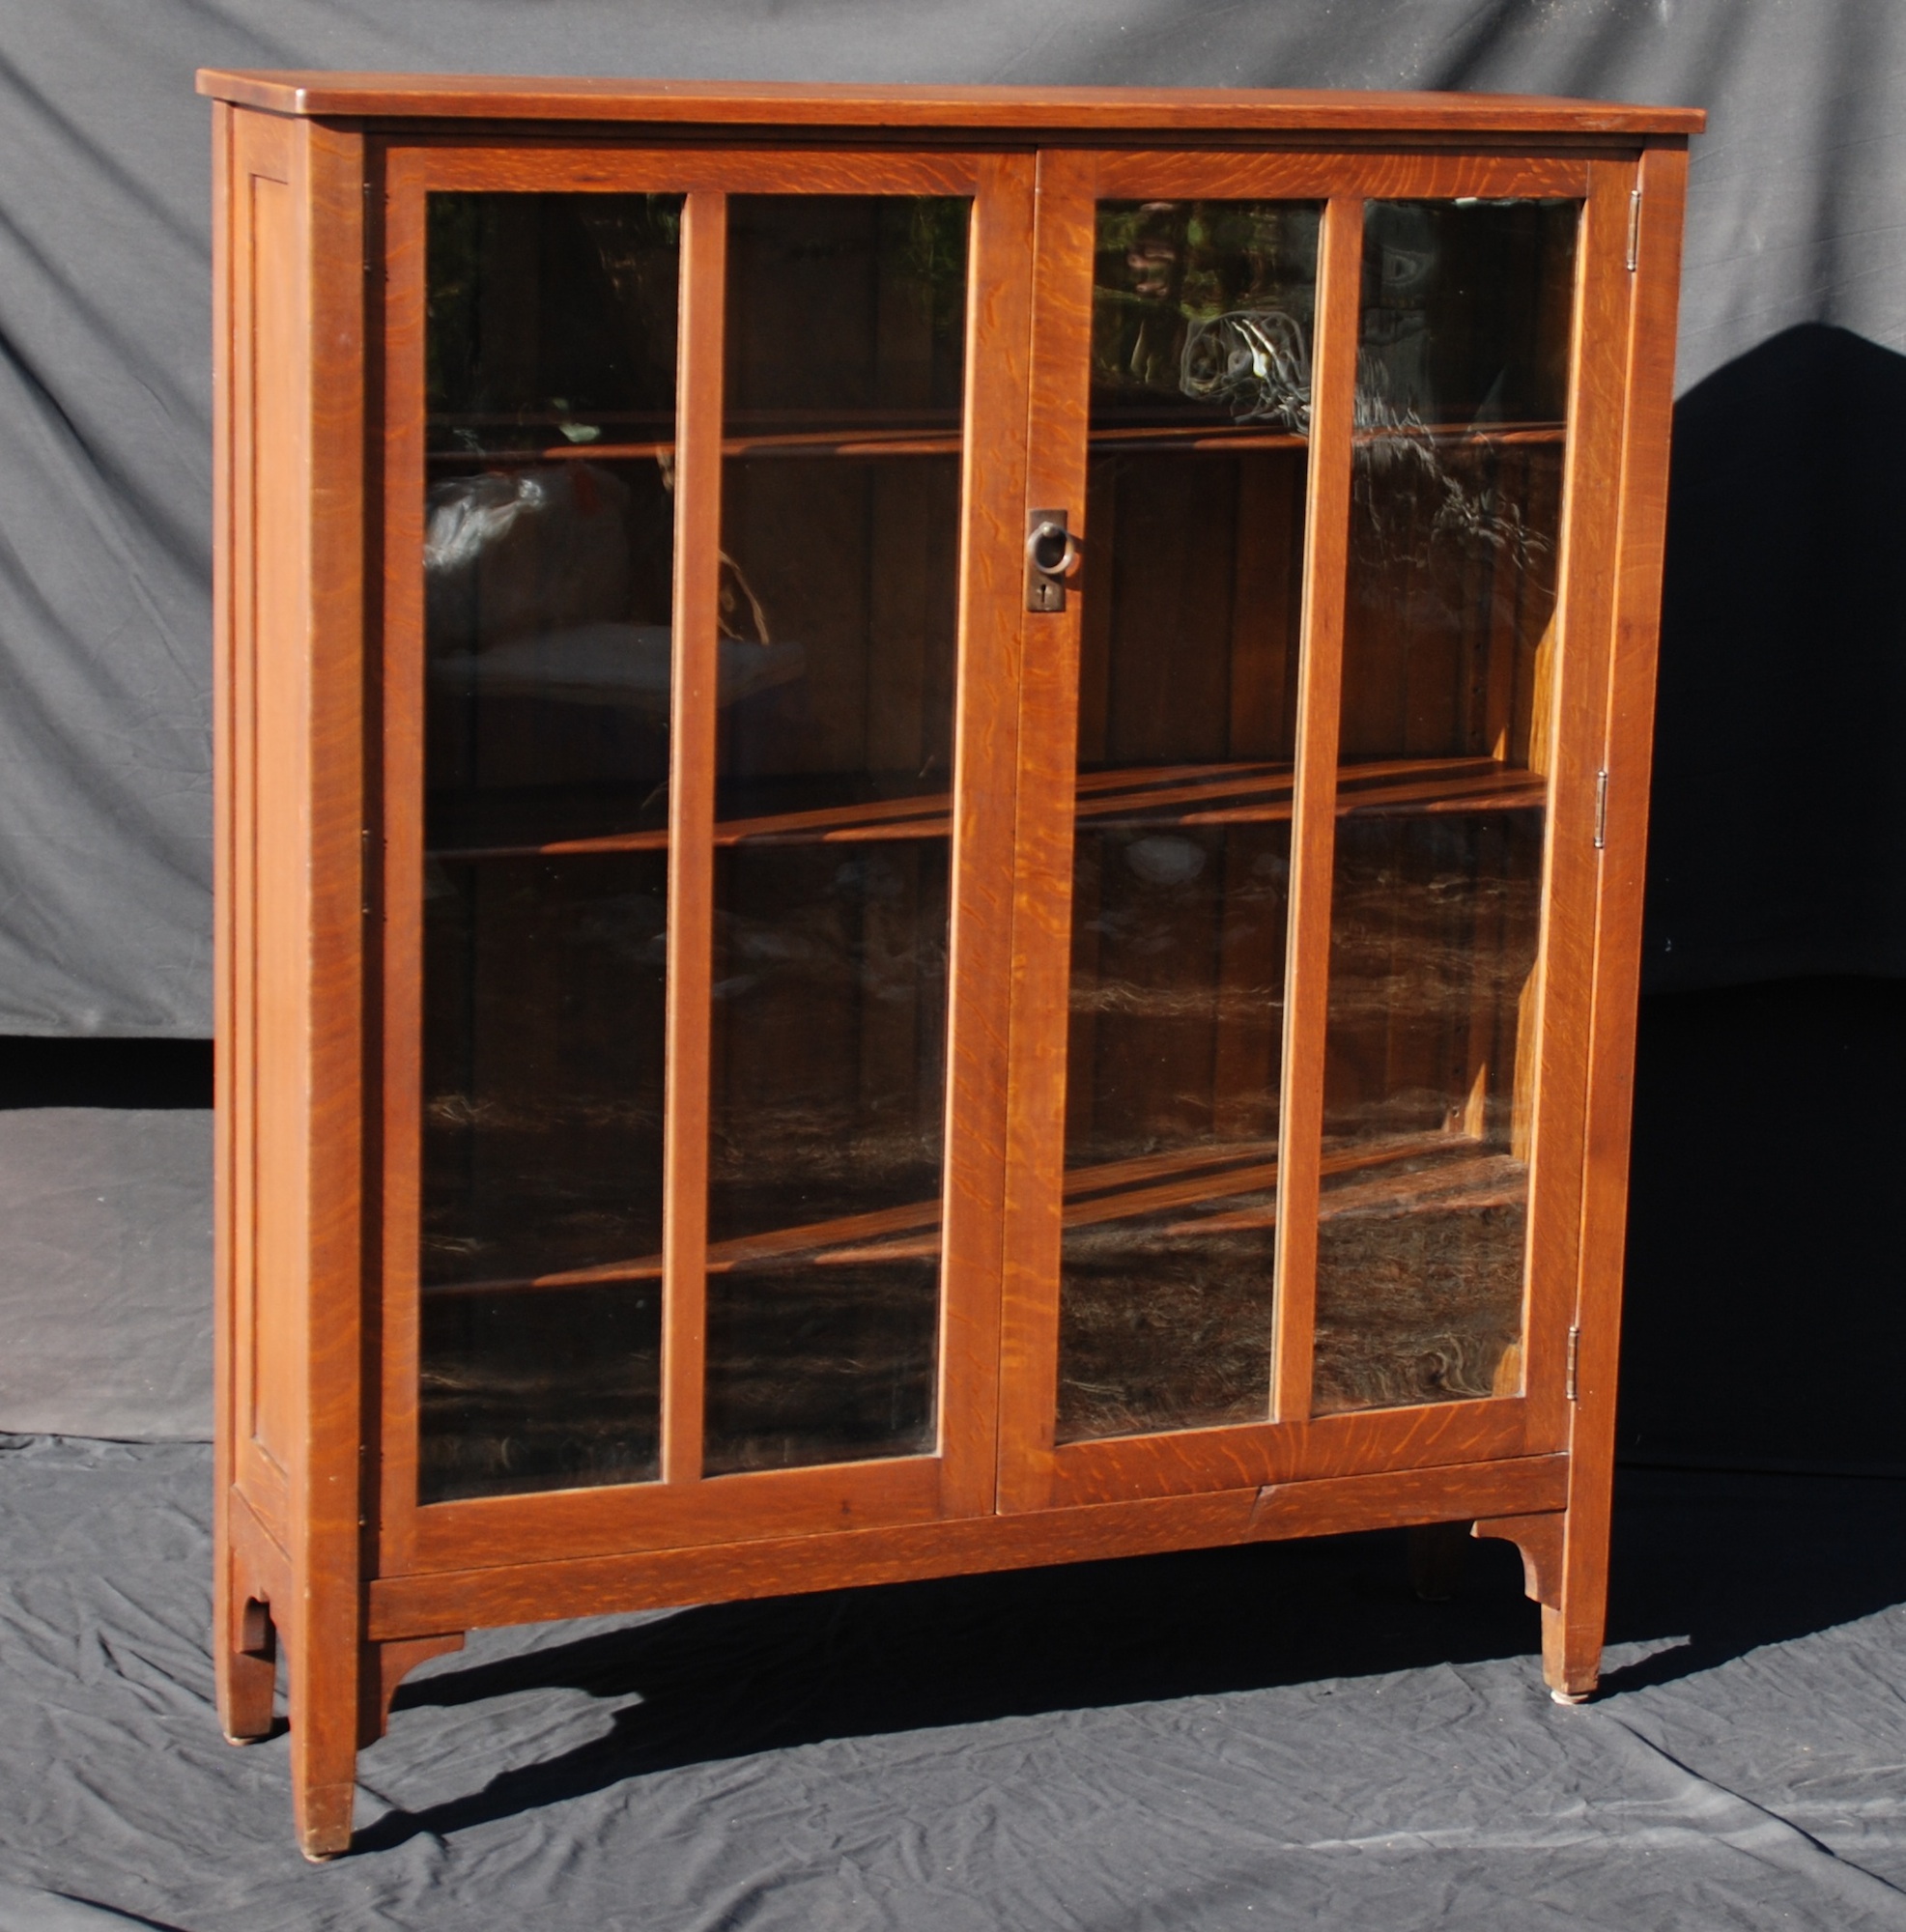 Creatice Stickley Bookcase for Large Space